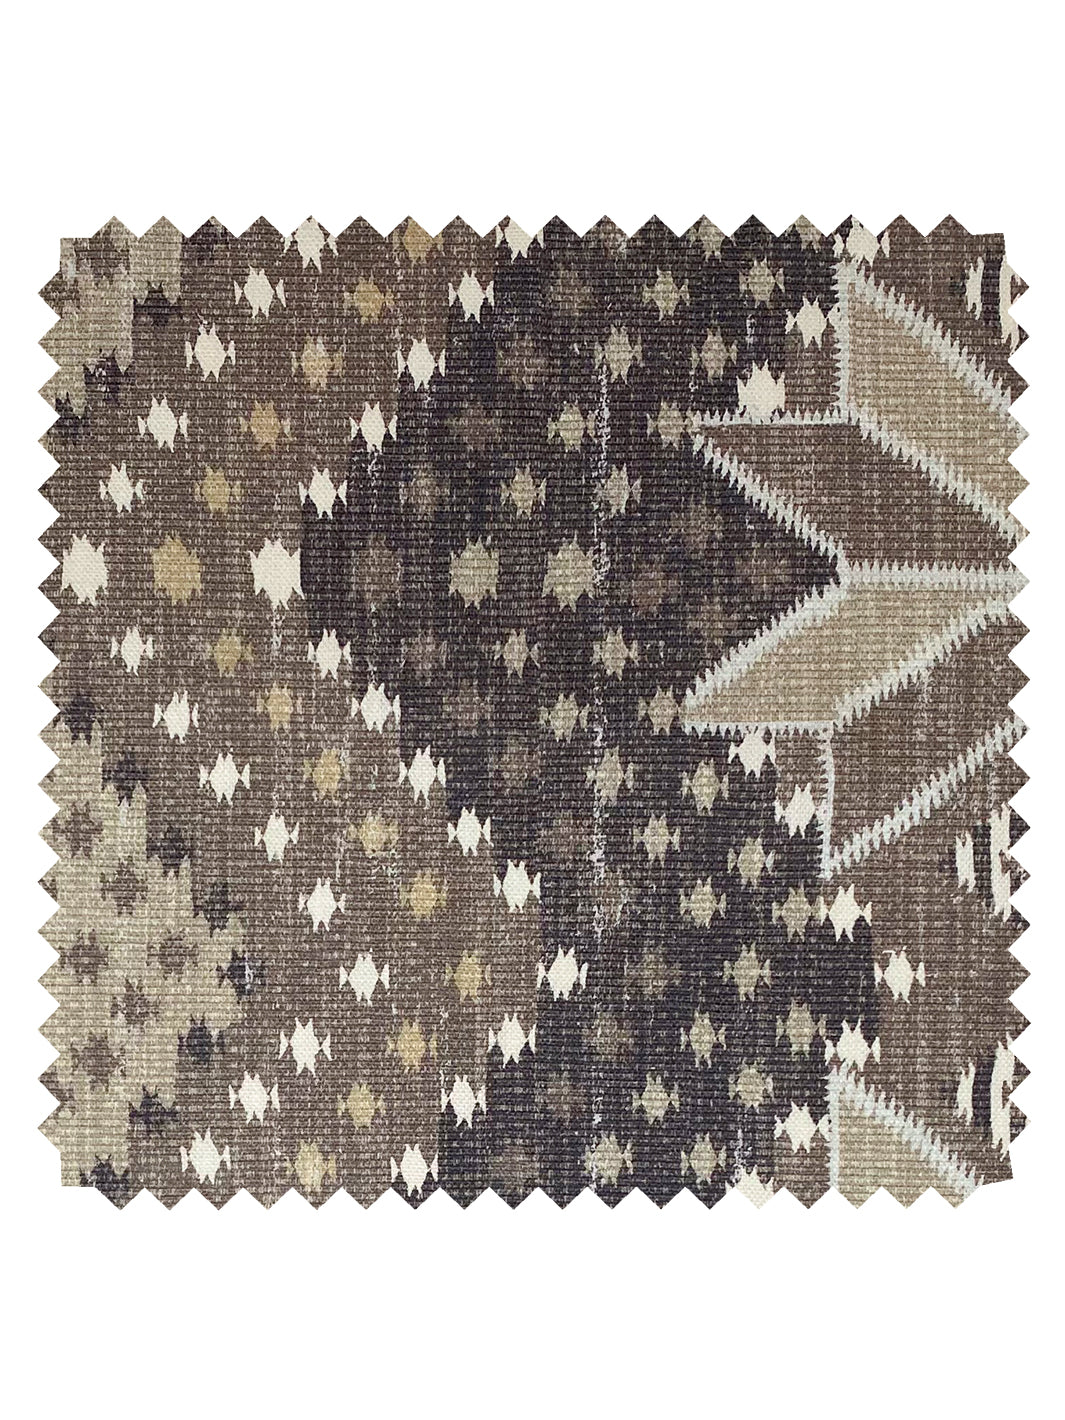 'Northstar Blanket' Linen Fabric by Nathan Turner - Brown